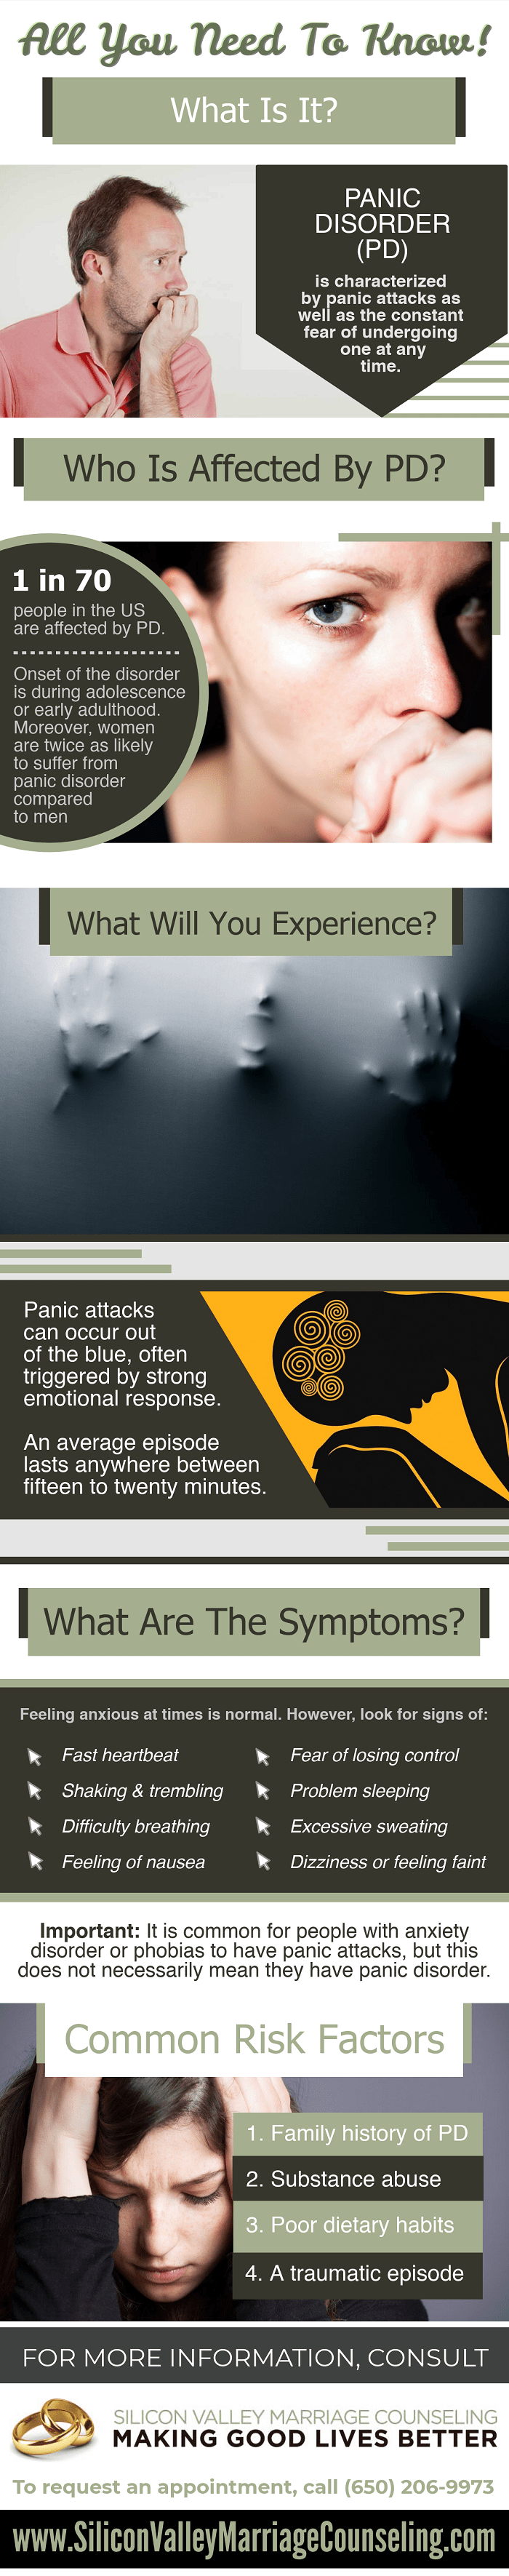 Panic Disorder is characterized by panic attacks